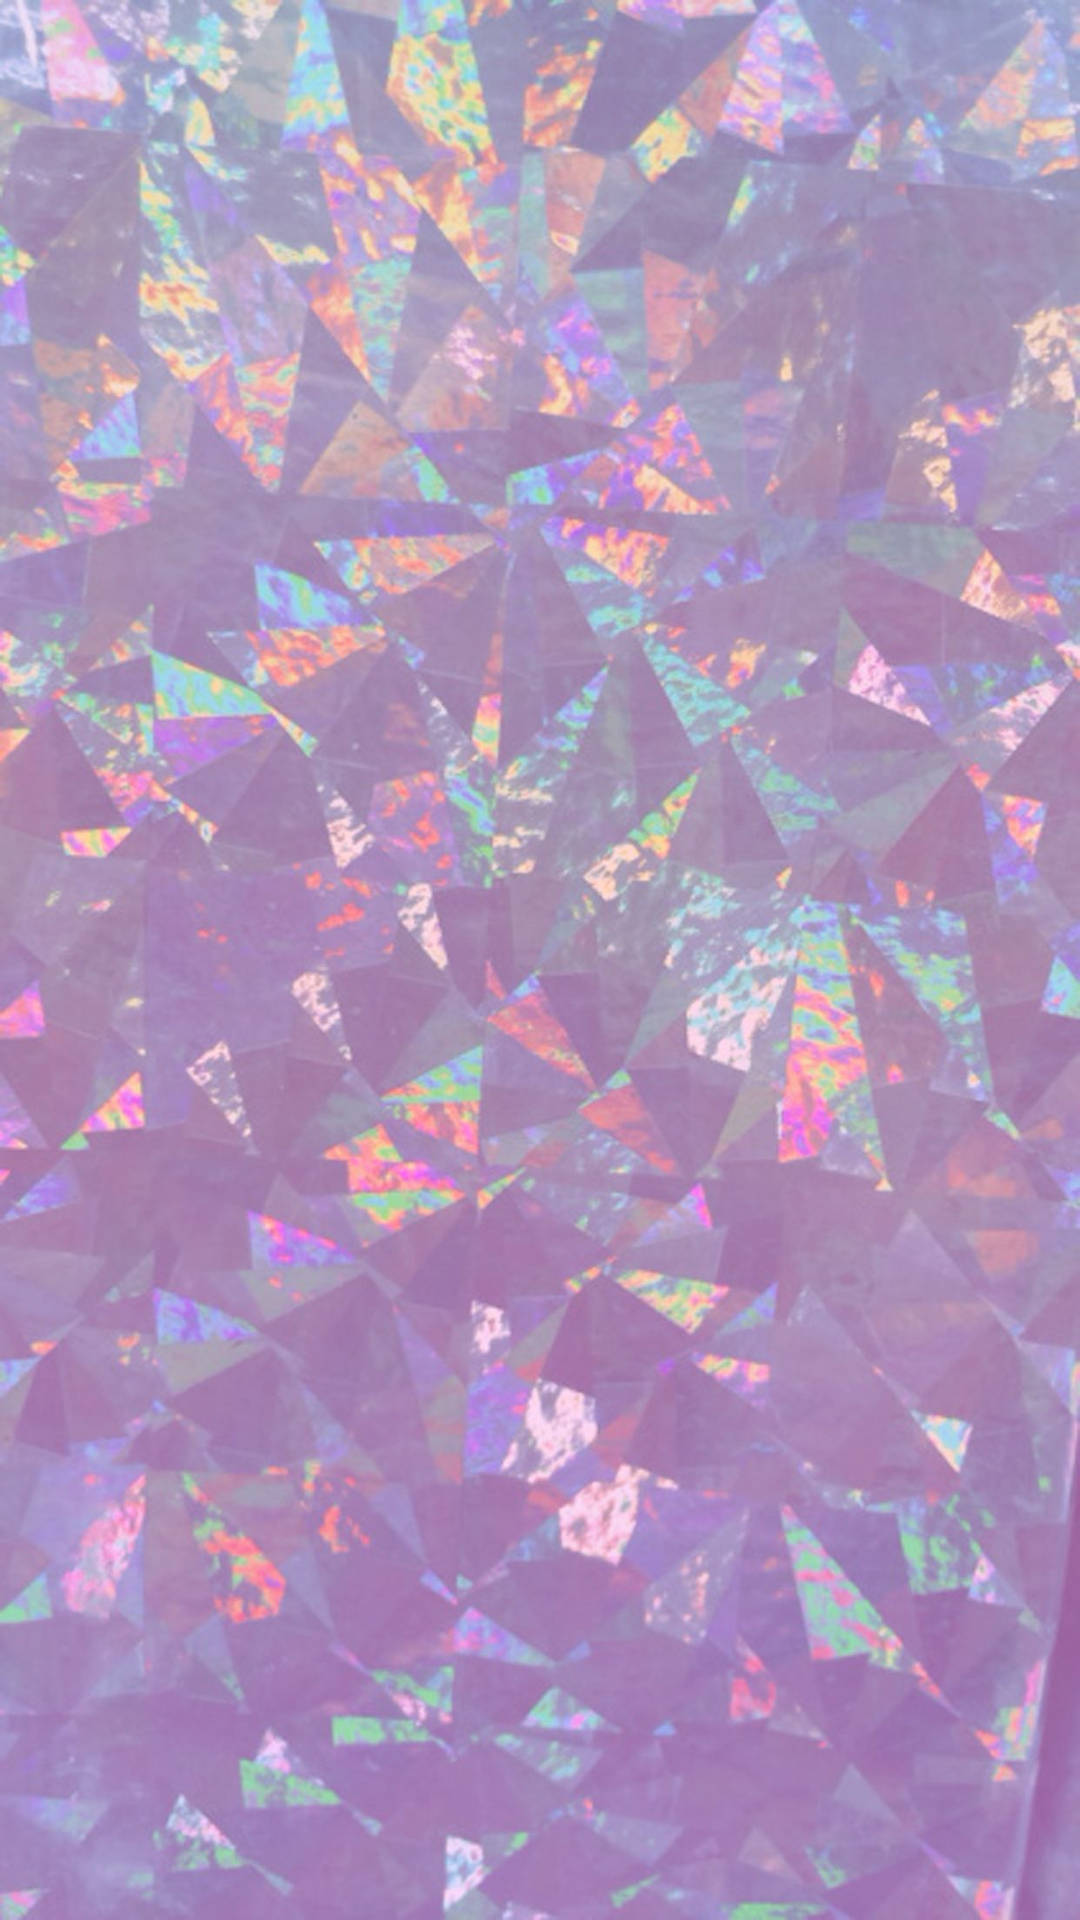 Pretty Holographic Vertical Image Wallpaper